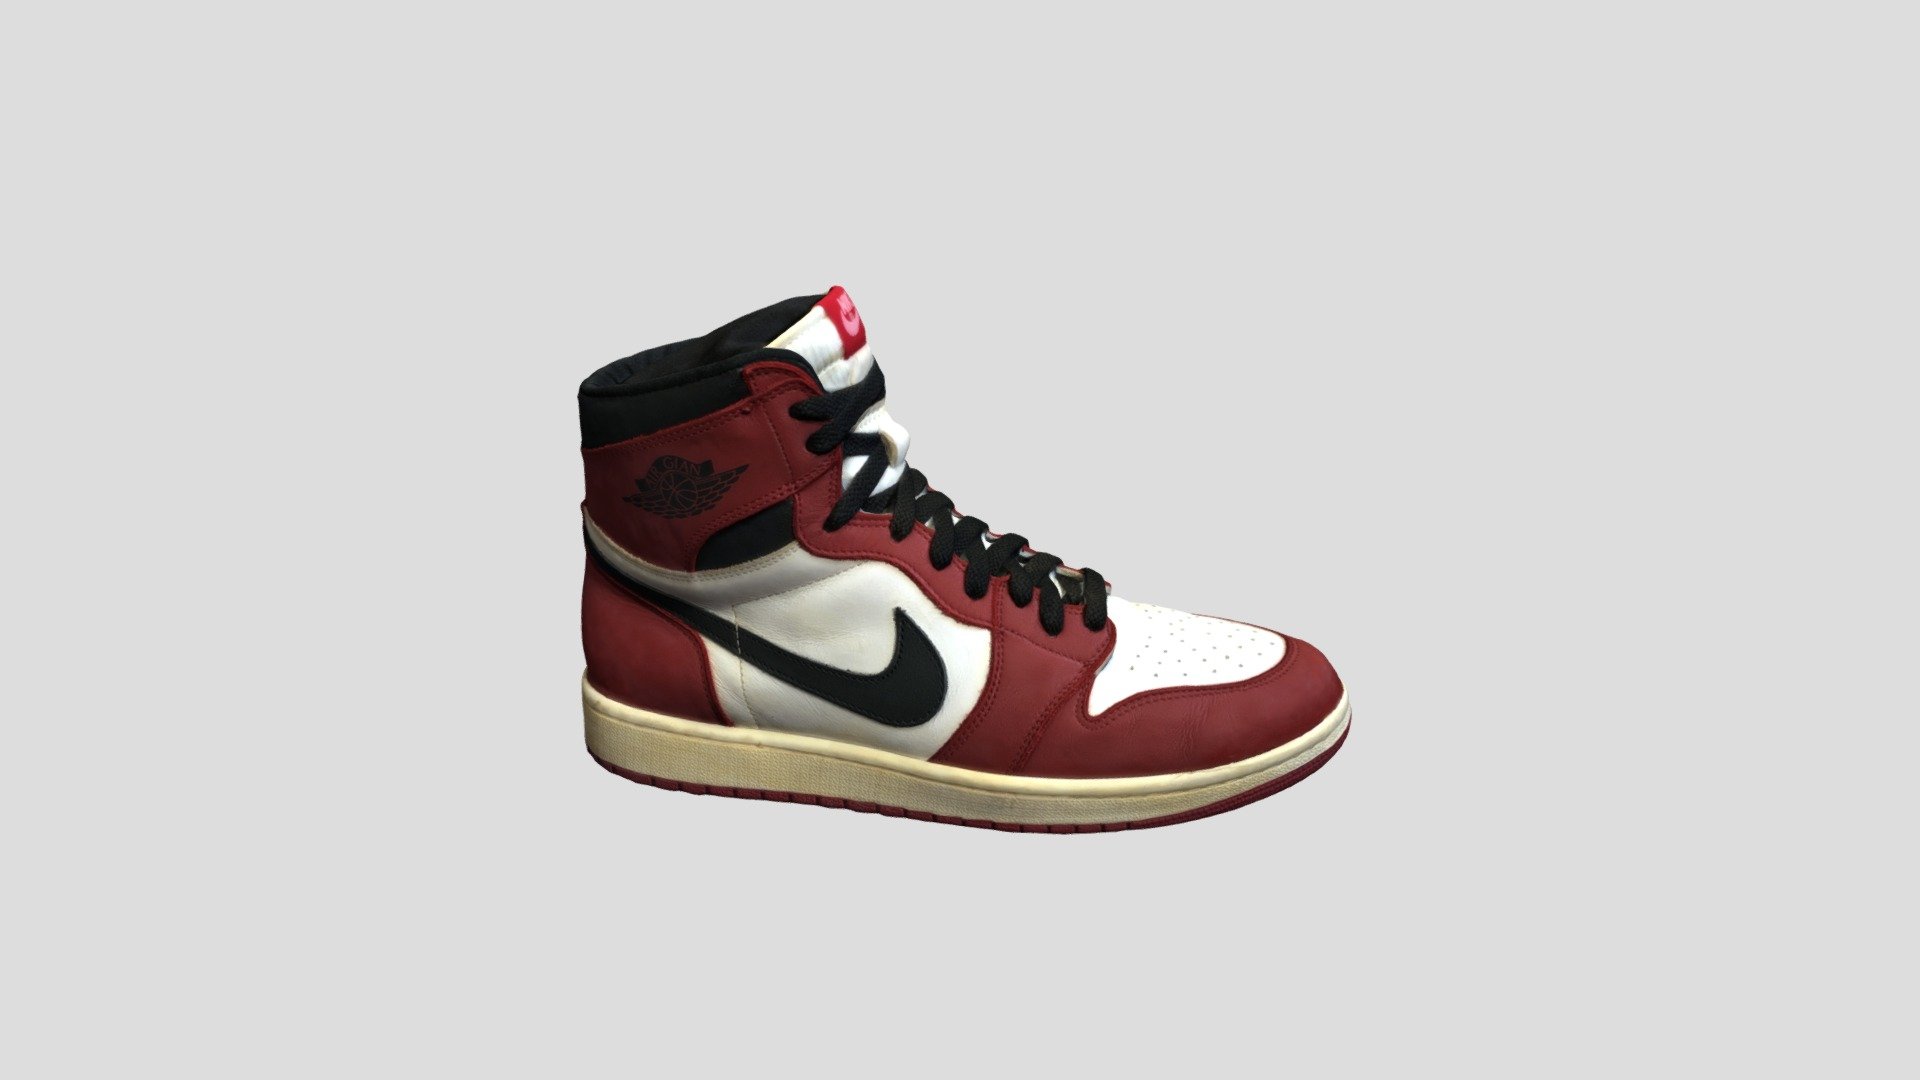 An handmade reproduction of a 1985 Jordan 1 by me, scanned and edited using Metashape and Meshmixer 3d model